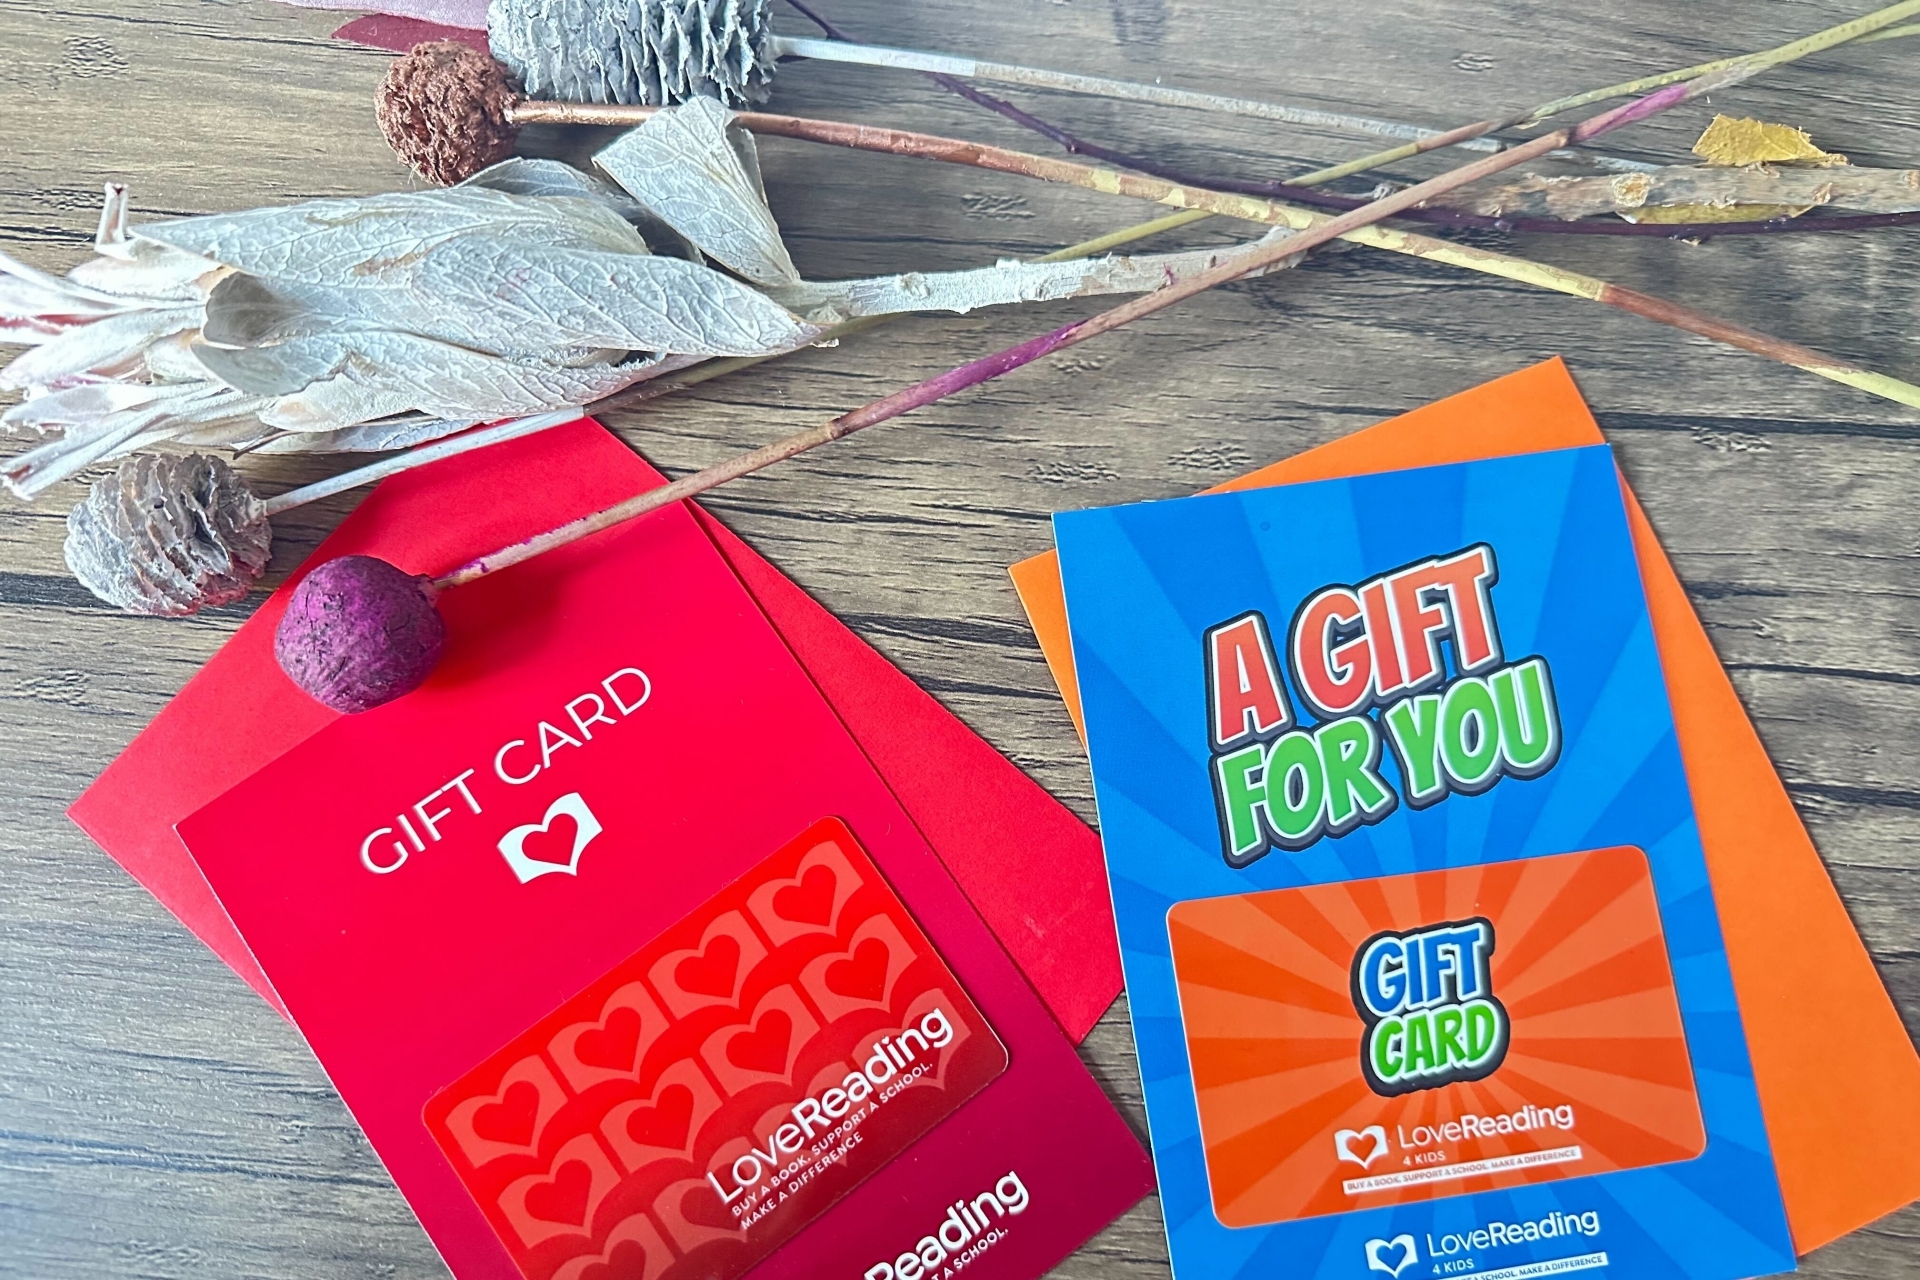 LoveReading Gift Cards Are Here. Buy Gifts Easily From Your Favourite Online Bookstore, and Gift Extra